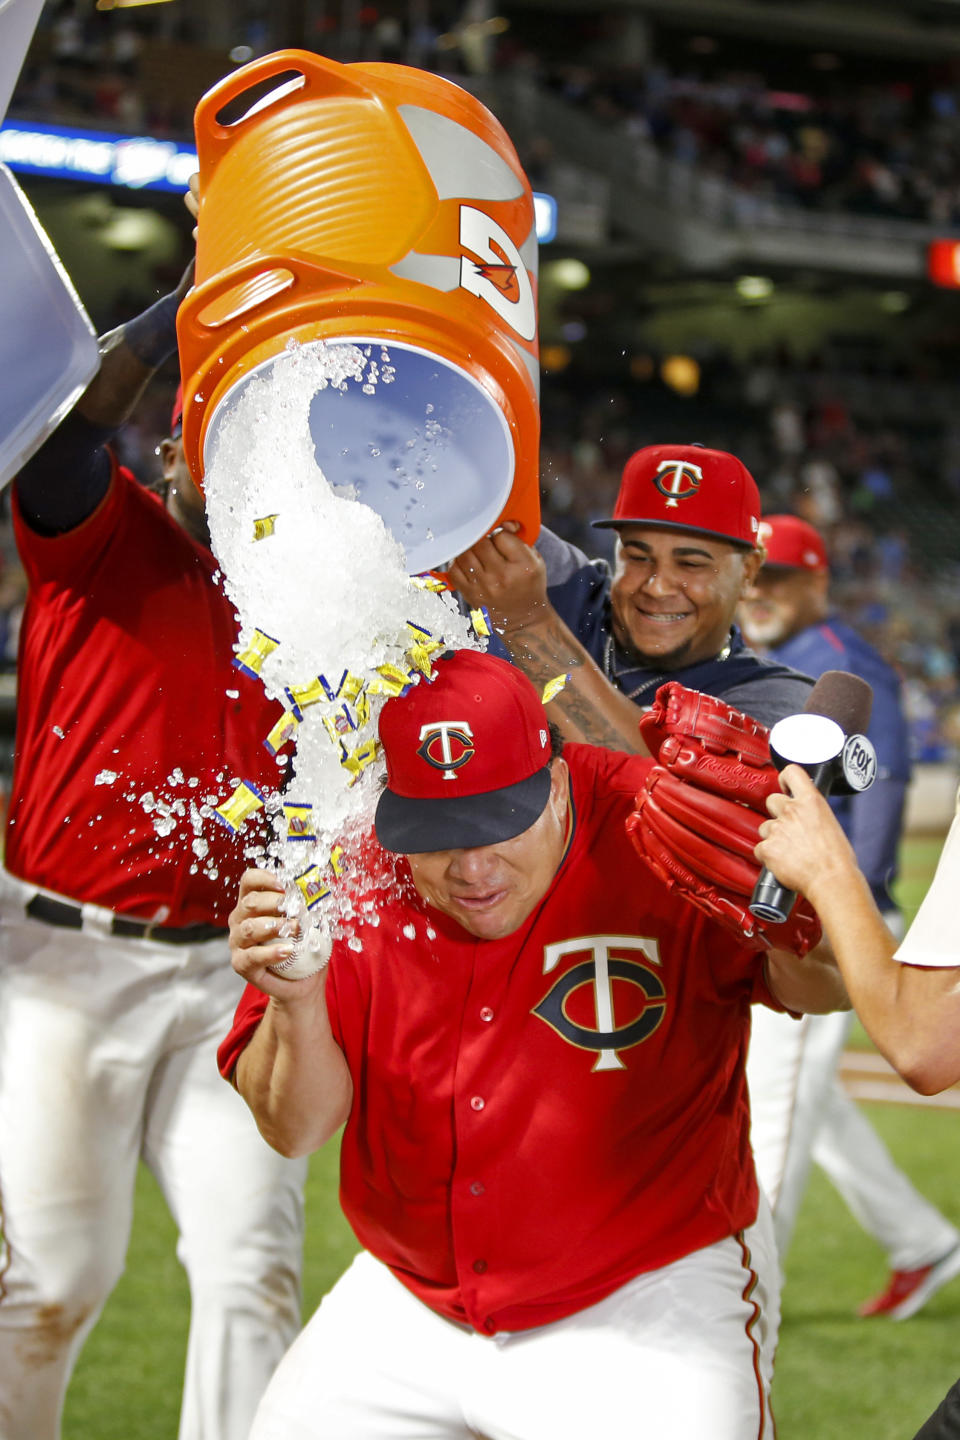 Minnesota Twins starting pitcher Bartolo Colon is doused by teammates after throwing a complete baseball game against the Rangers. (AP)